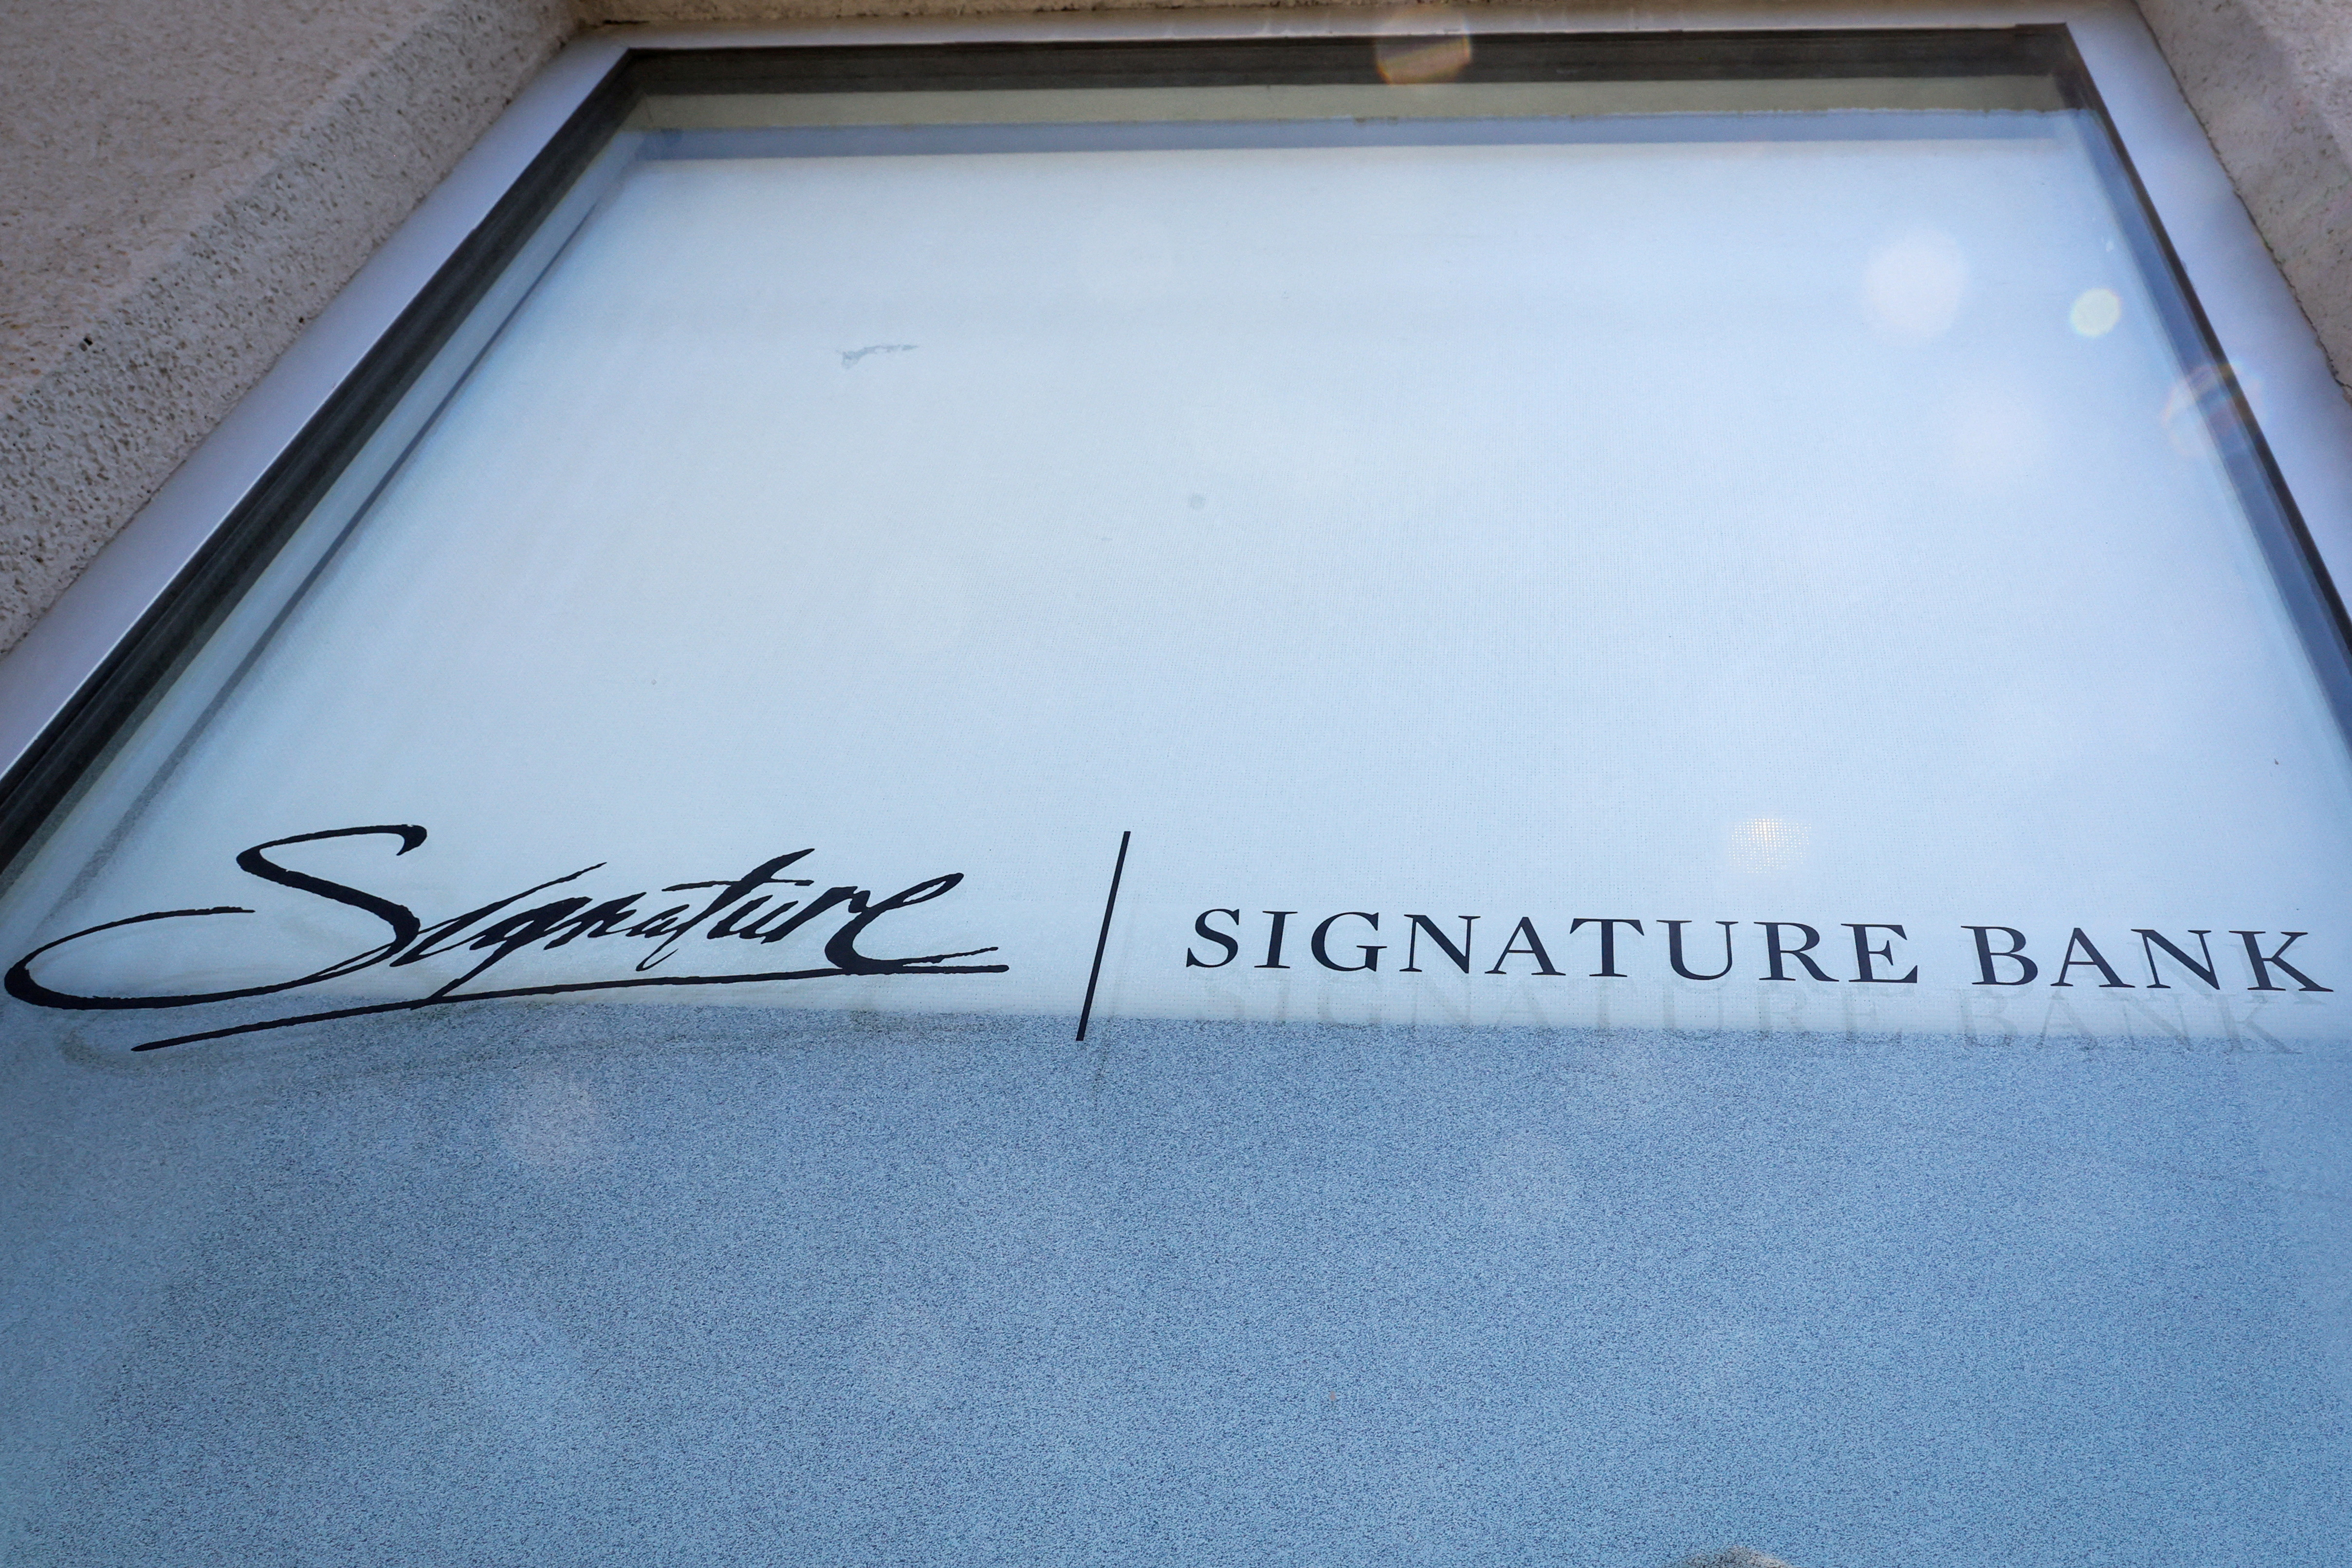 The company logo for Signature Bank is displayed at a location in Brooklyn, New York